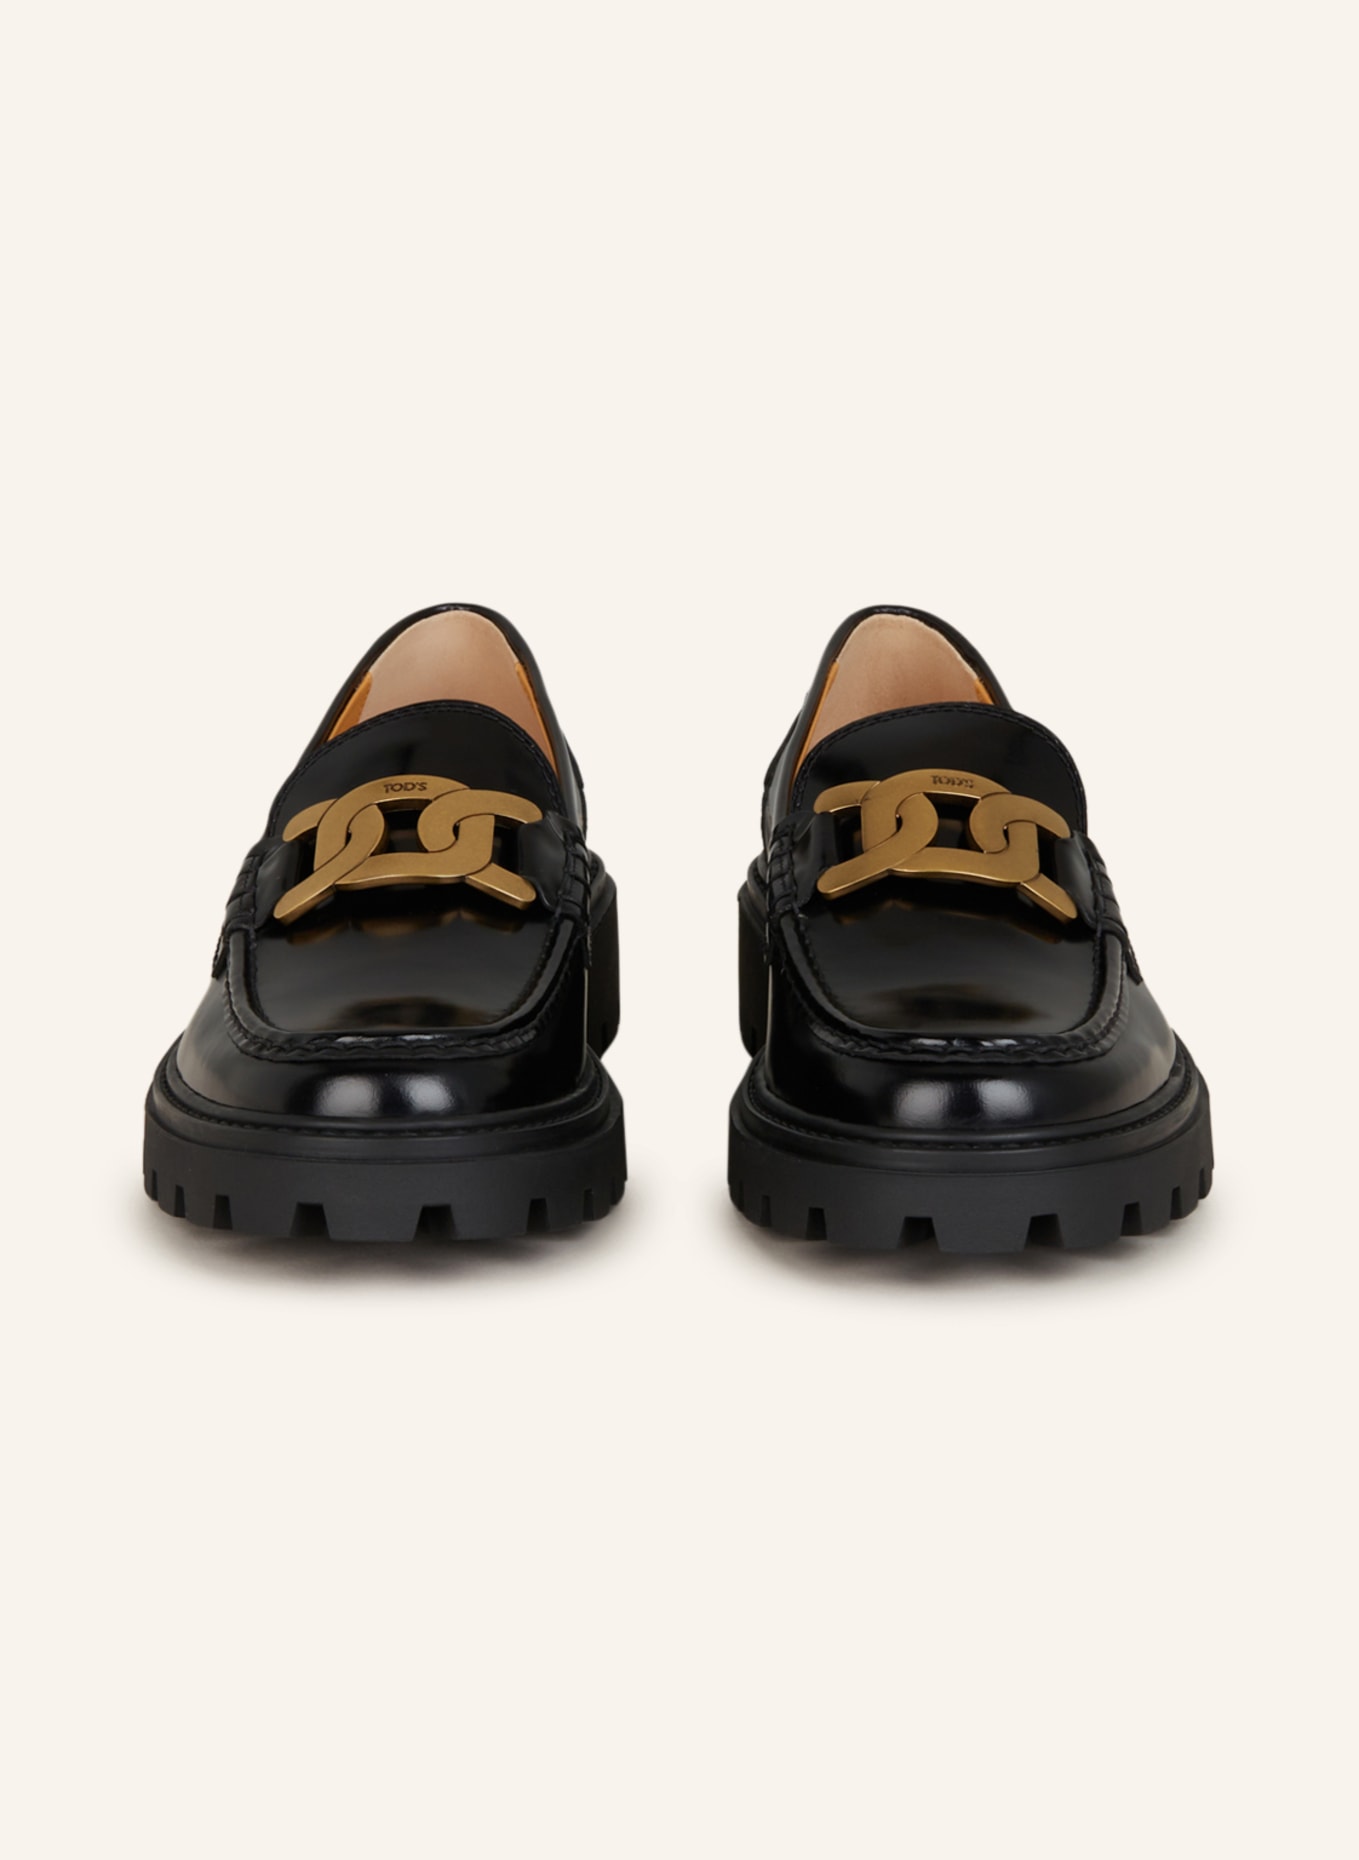 TOD'S Loafers, Color: BLACK (Image 3)